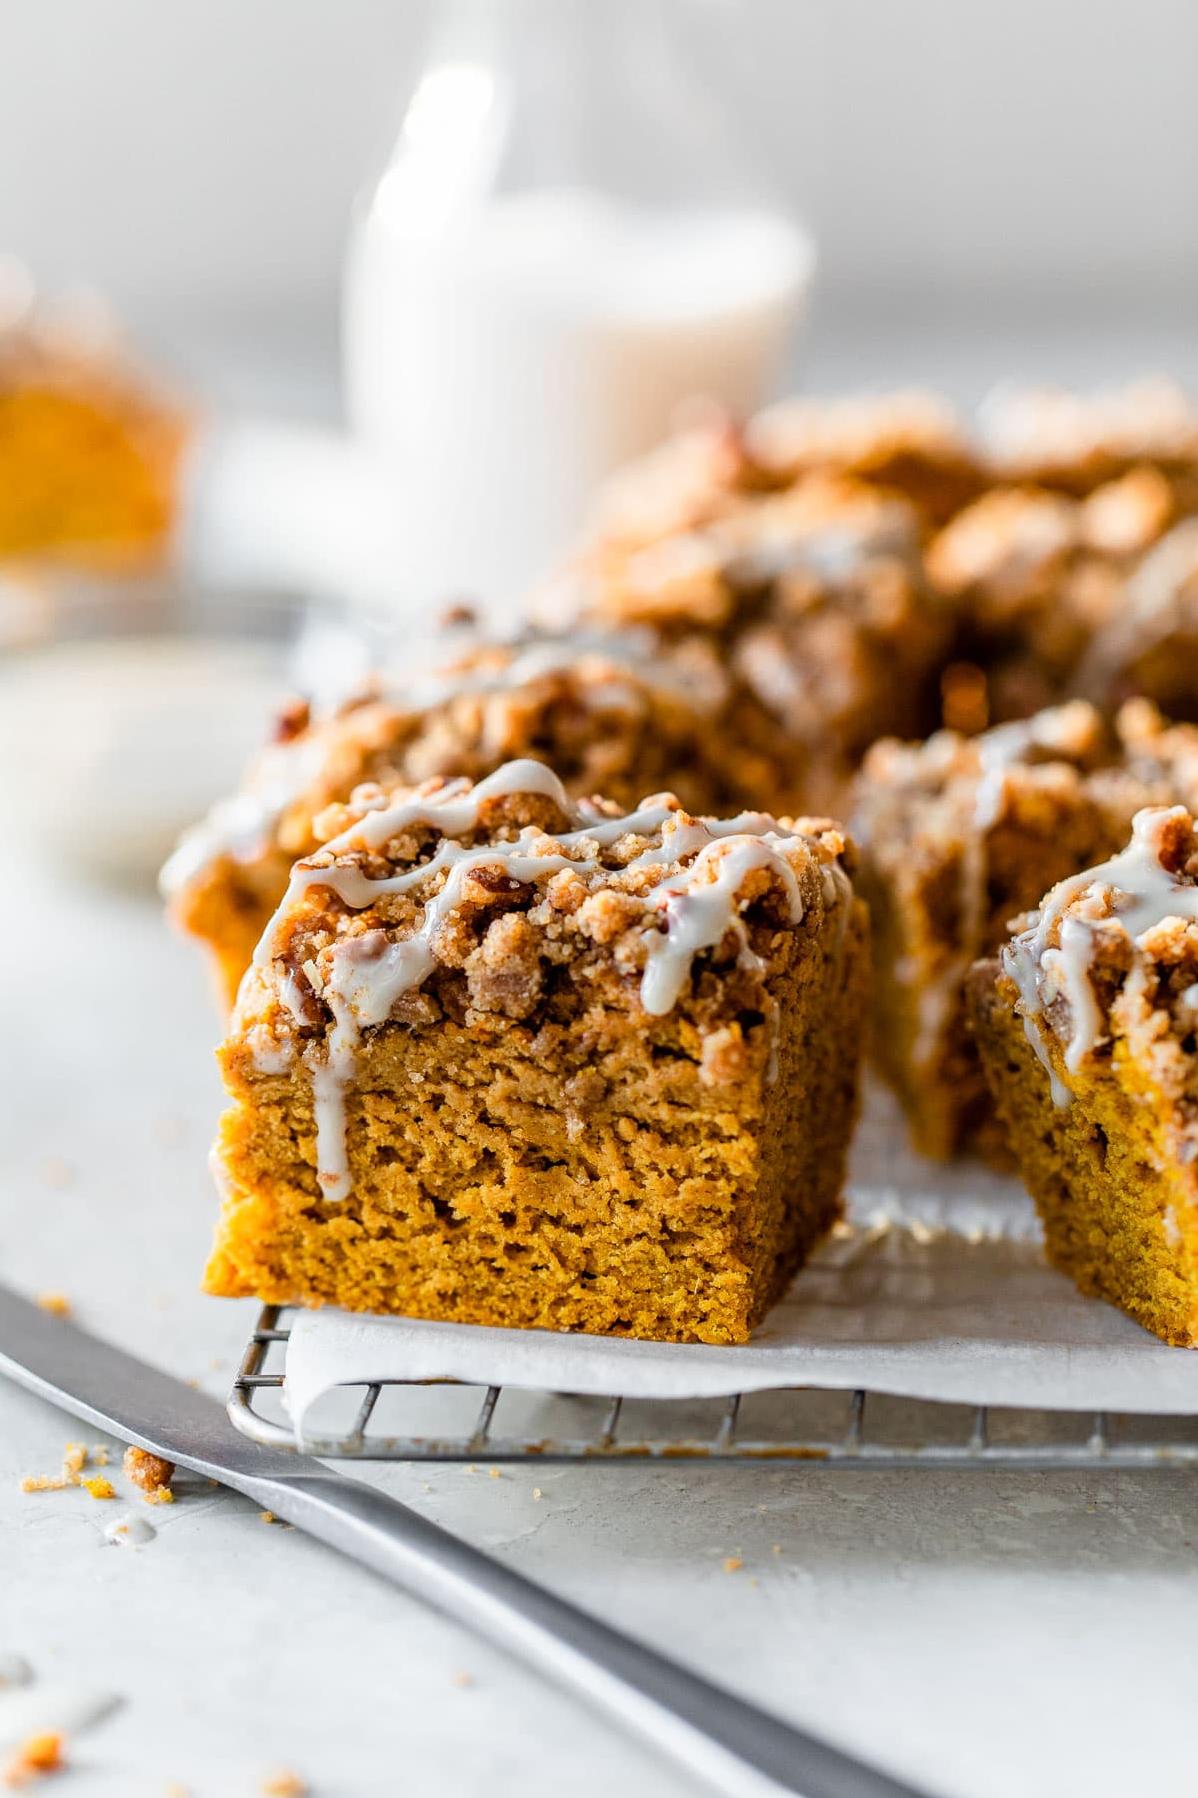  Pump up your morning with this pumpkin coffee cake